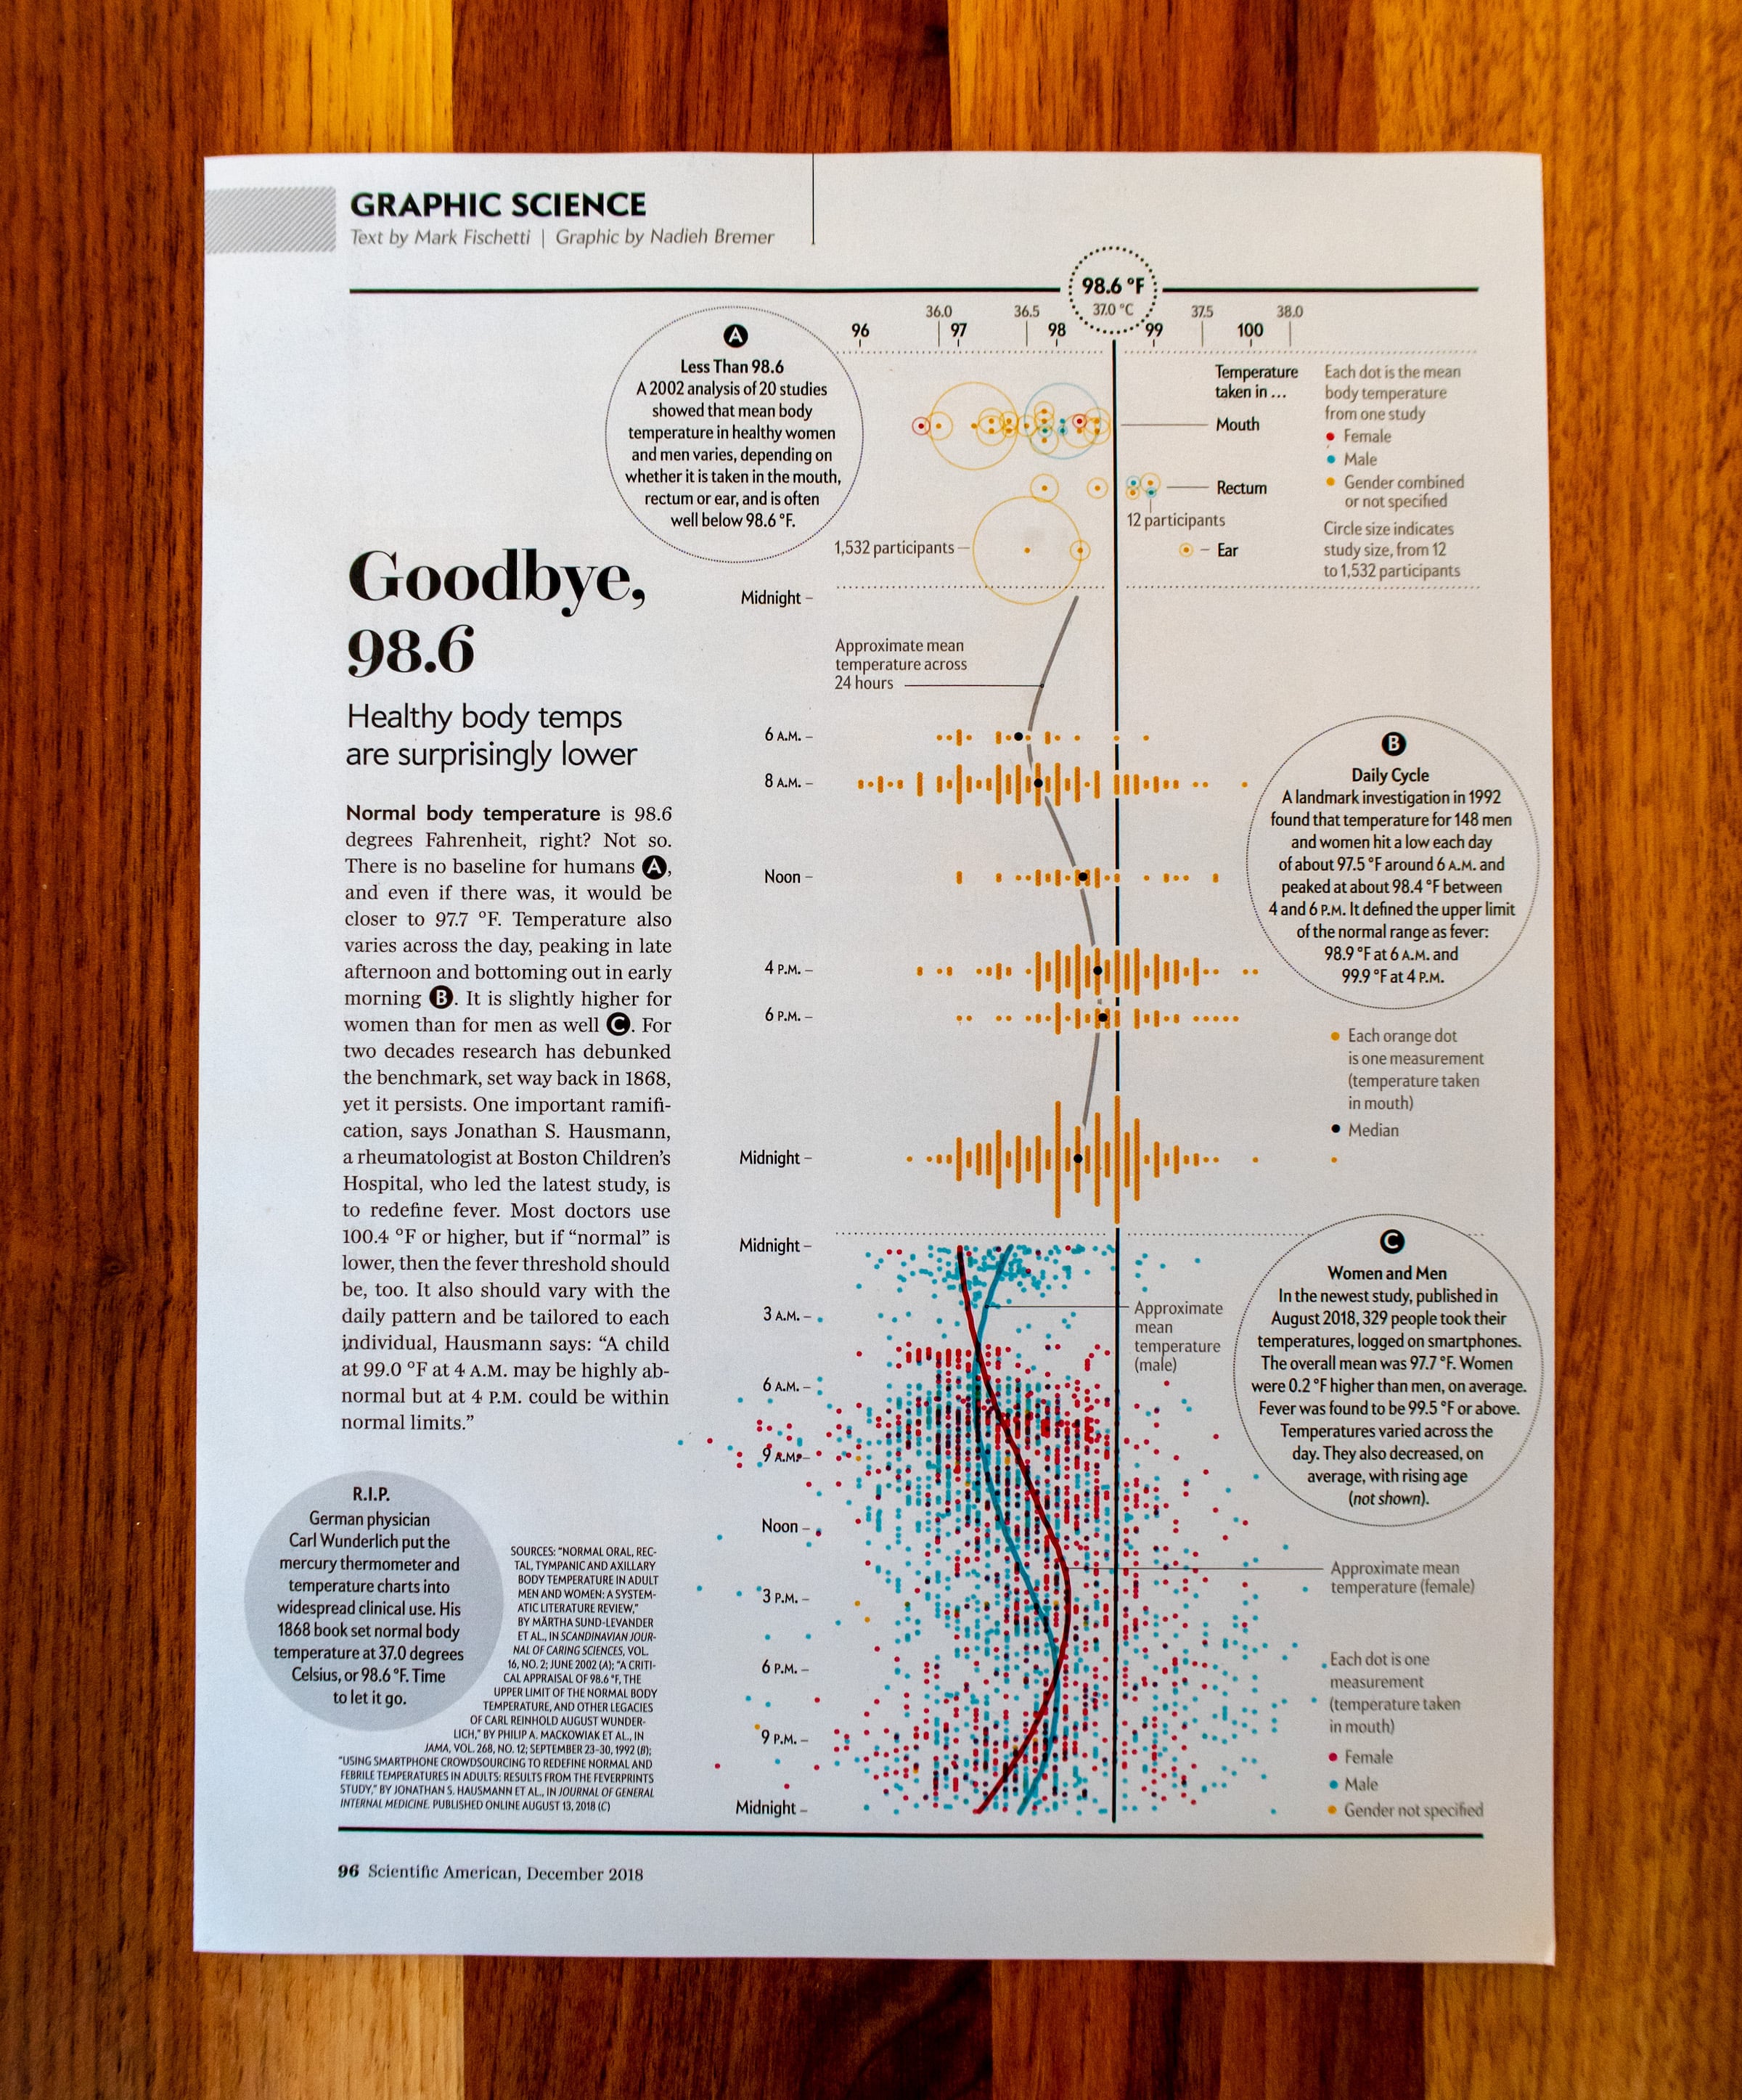 The full Graphic Science page in the December issue of the Scientific American